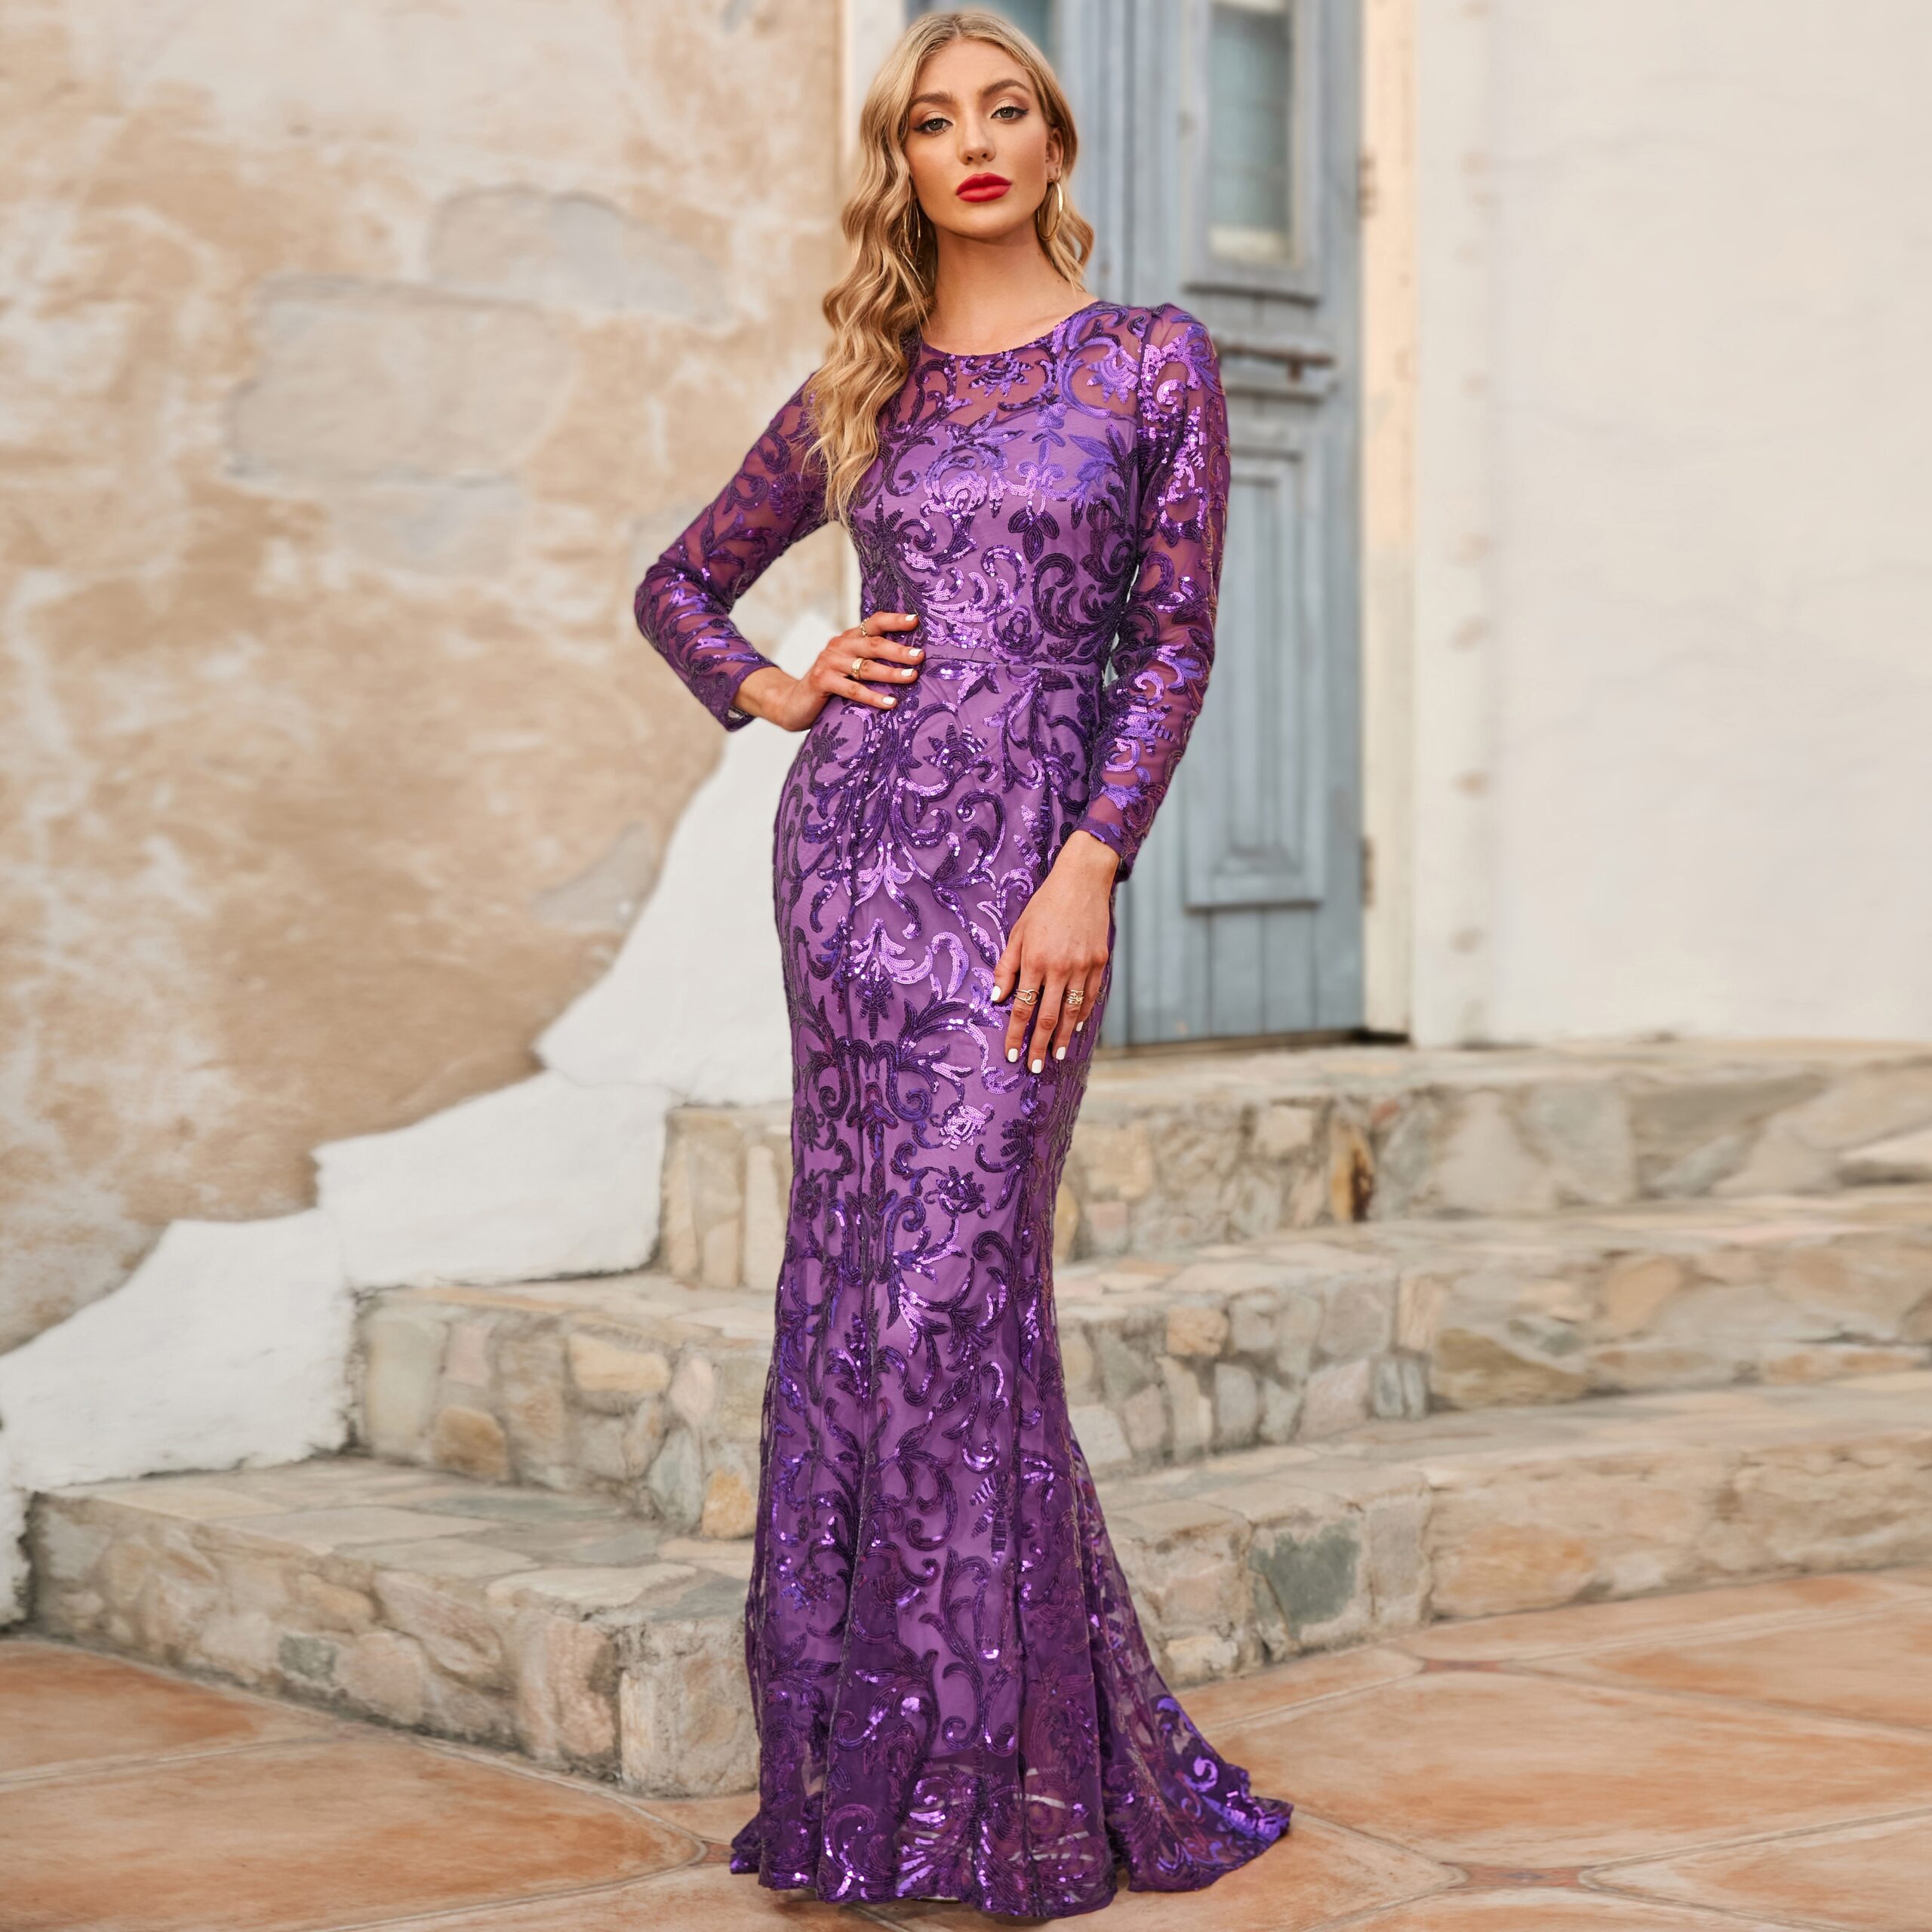 Mother of Brides Dress Women Bodycon Summer for 2022 Long Sleeve Elegant Fashion Sequins Shinning Wedding Ball Prom Gown Vestido